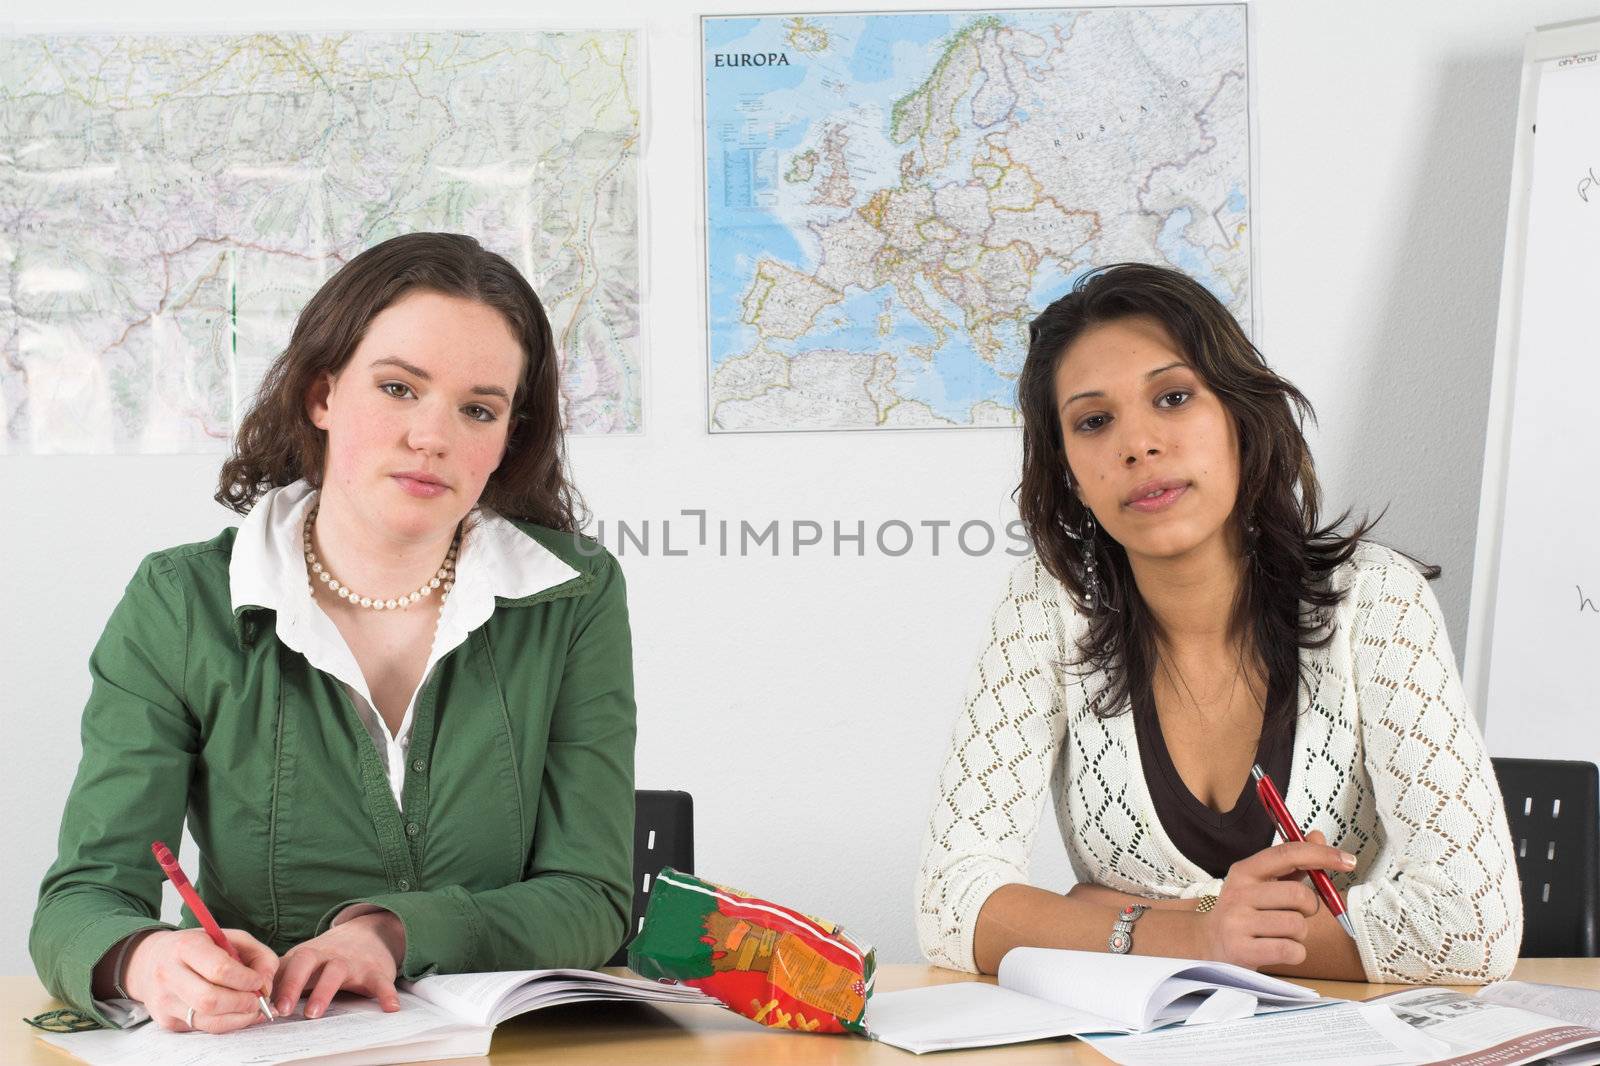 Two girls in a classroom looking very attentively to the teacher